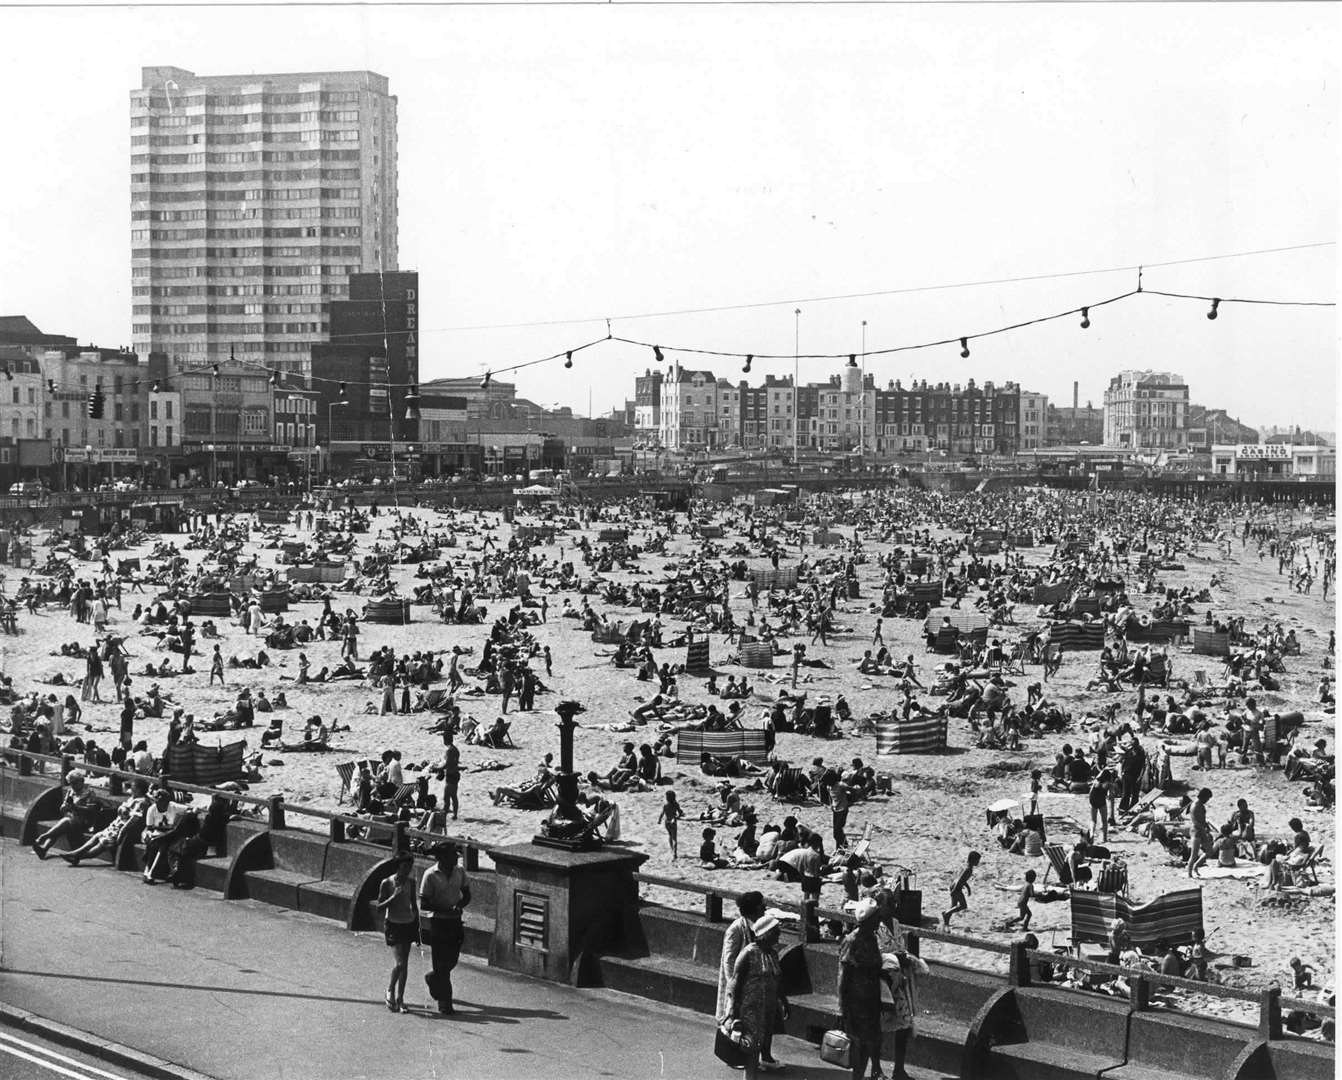 Crowded Margate beach in August 1976